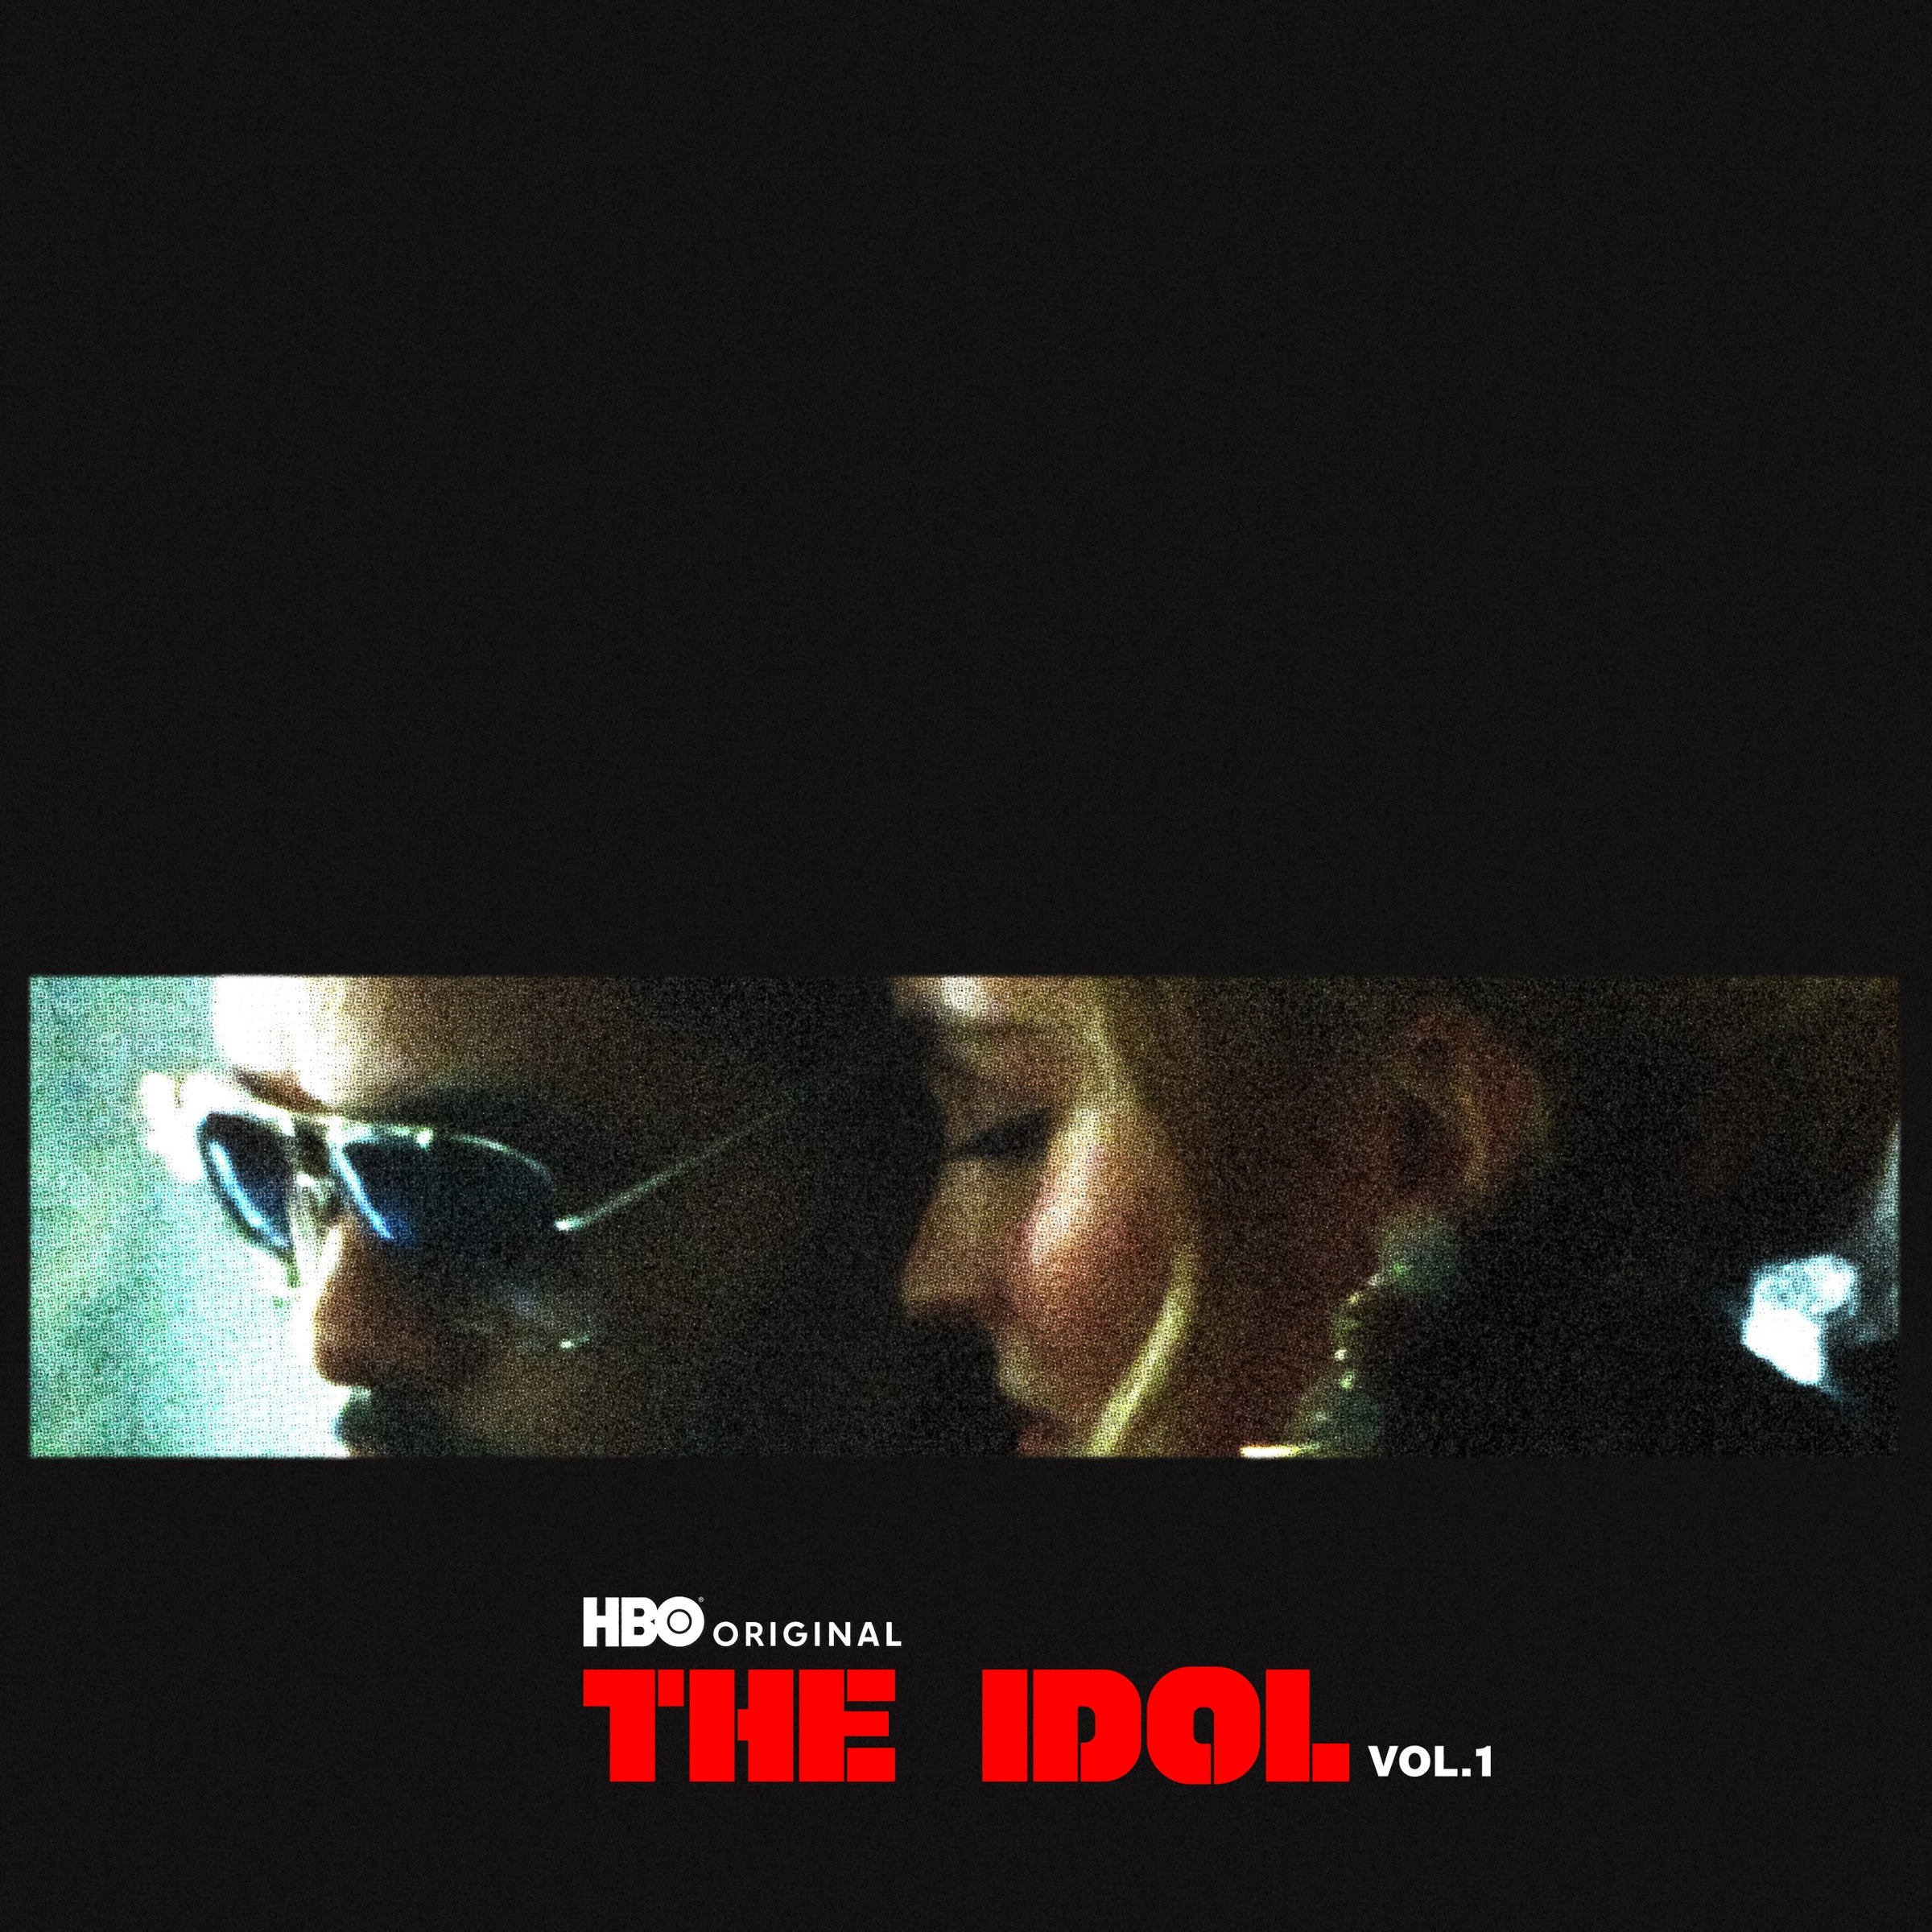 The Weeknd — The Idol, Vol. 1 (Music from the HBO Original Series) cover artwork